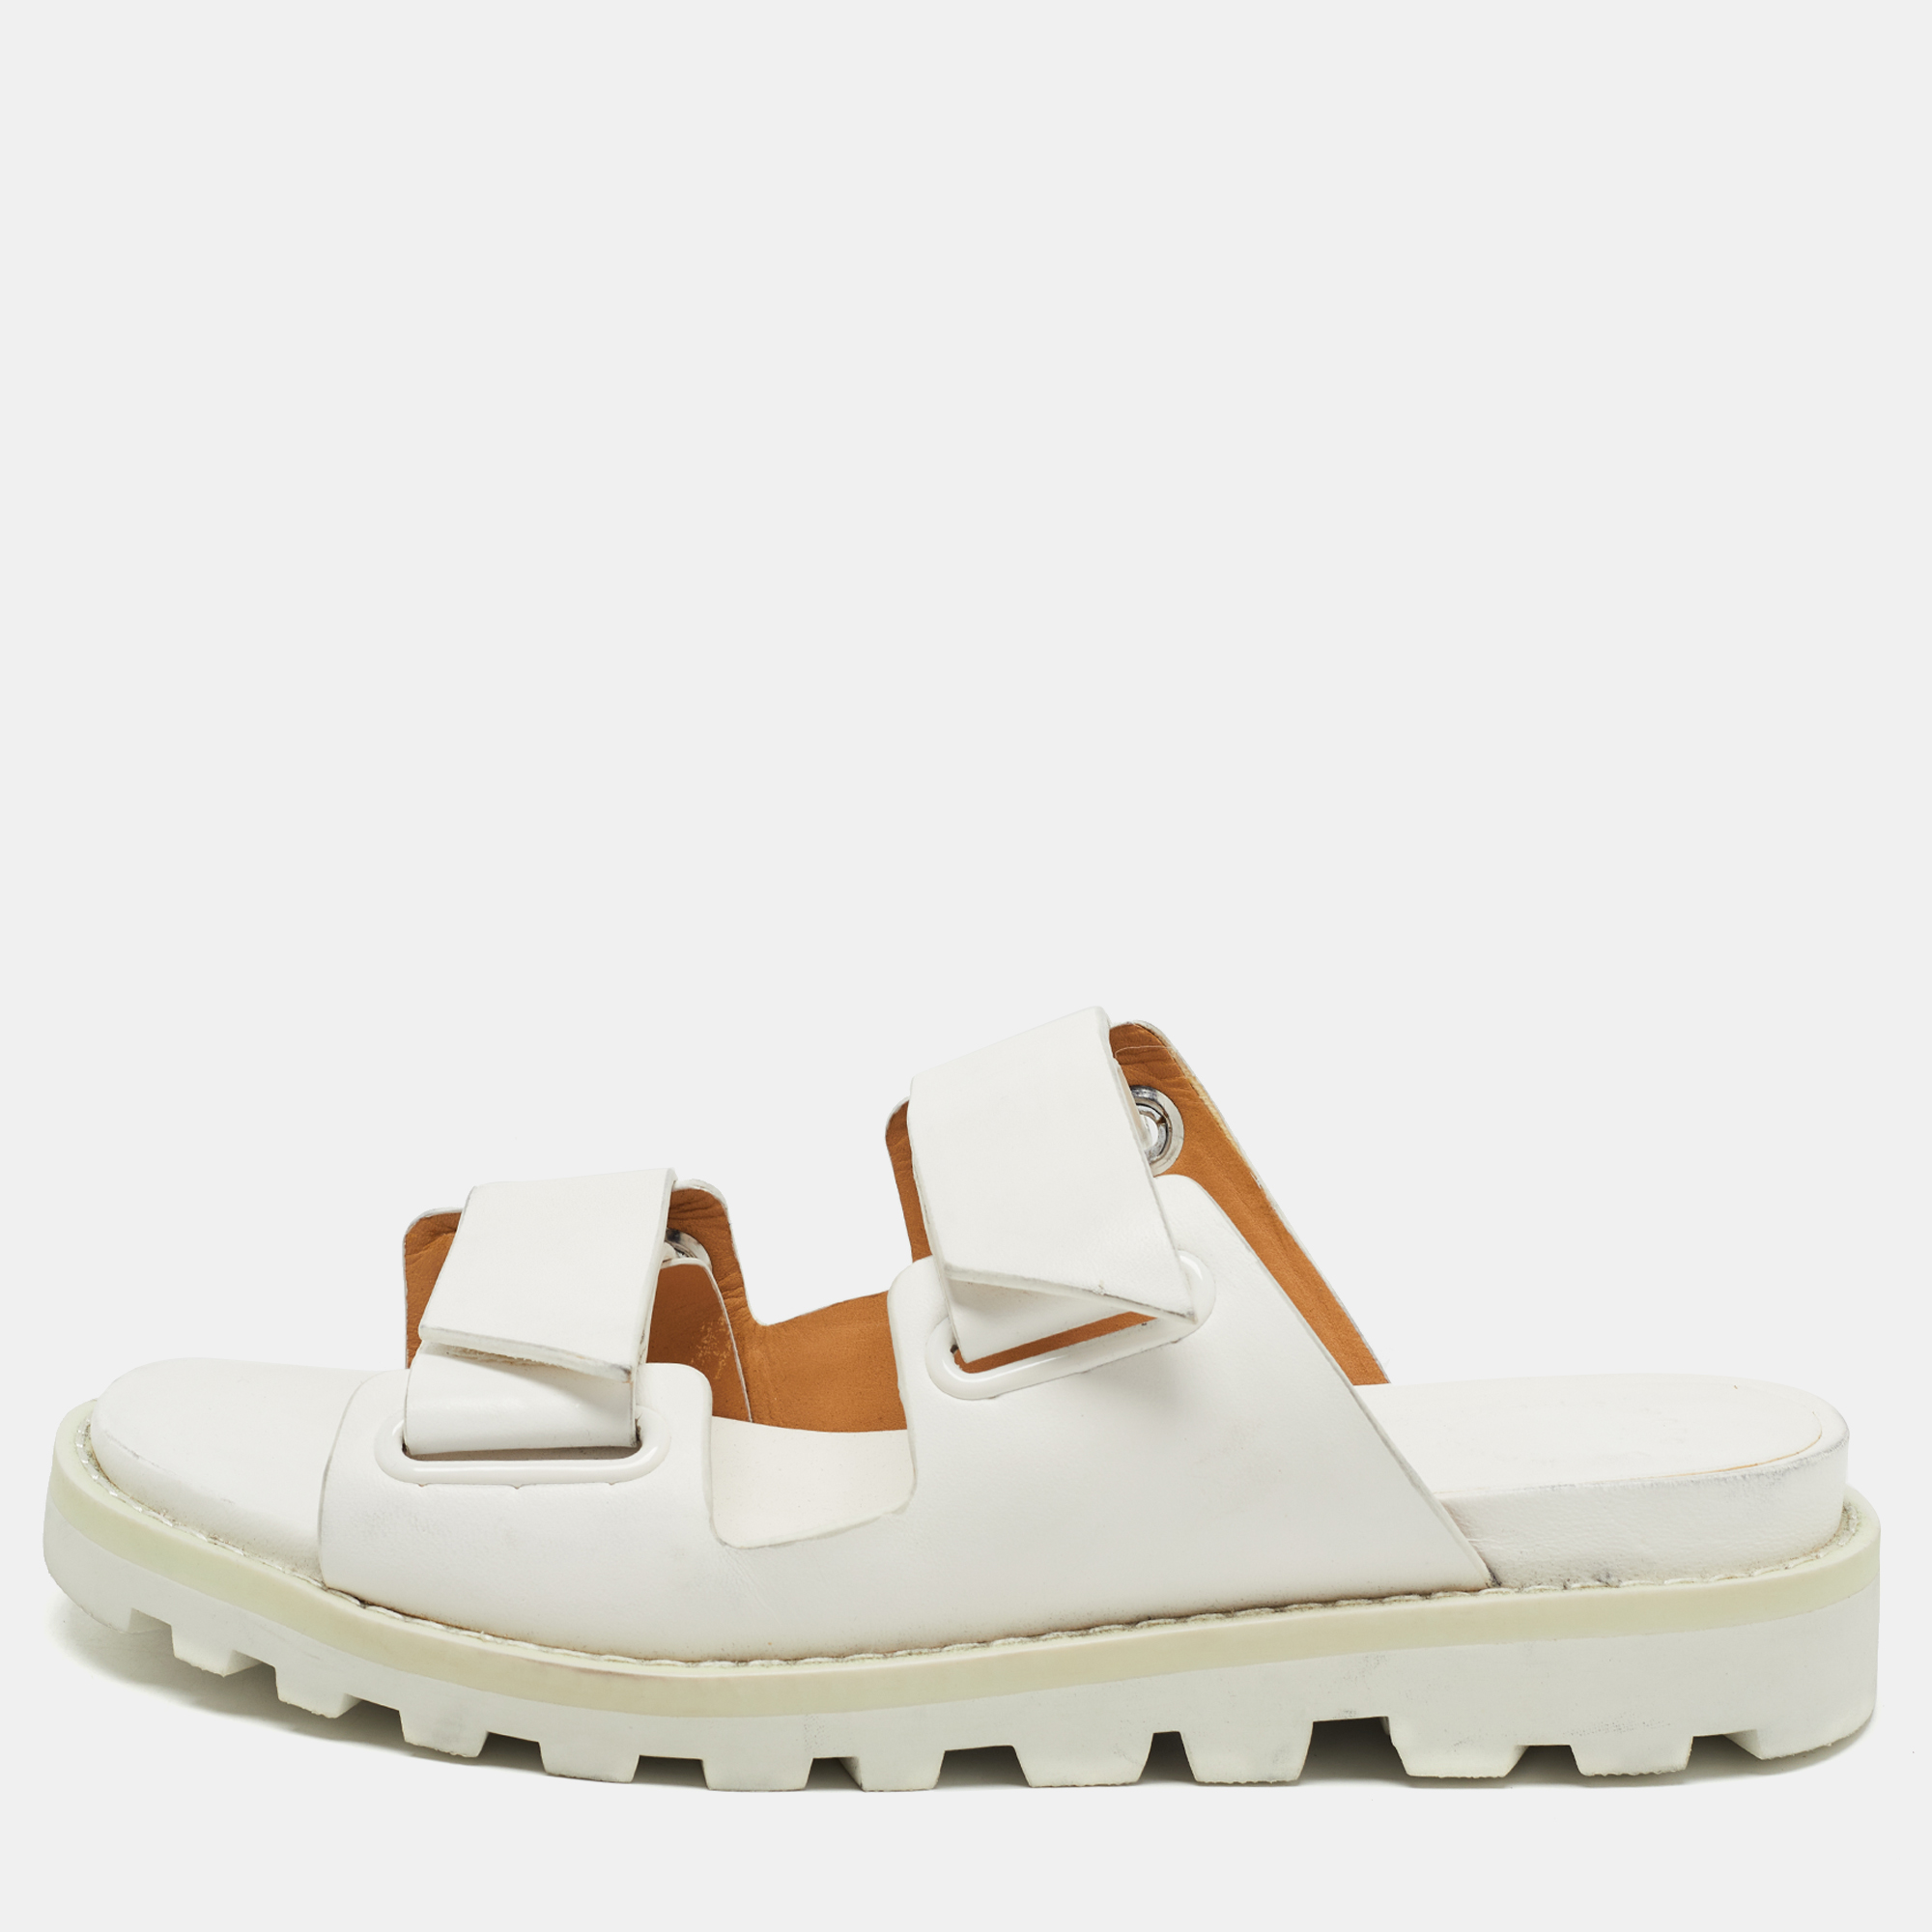 Pre-owned Marc By Marc Jacobs White Leather Slides Size 37